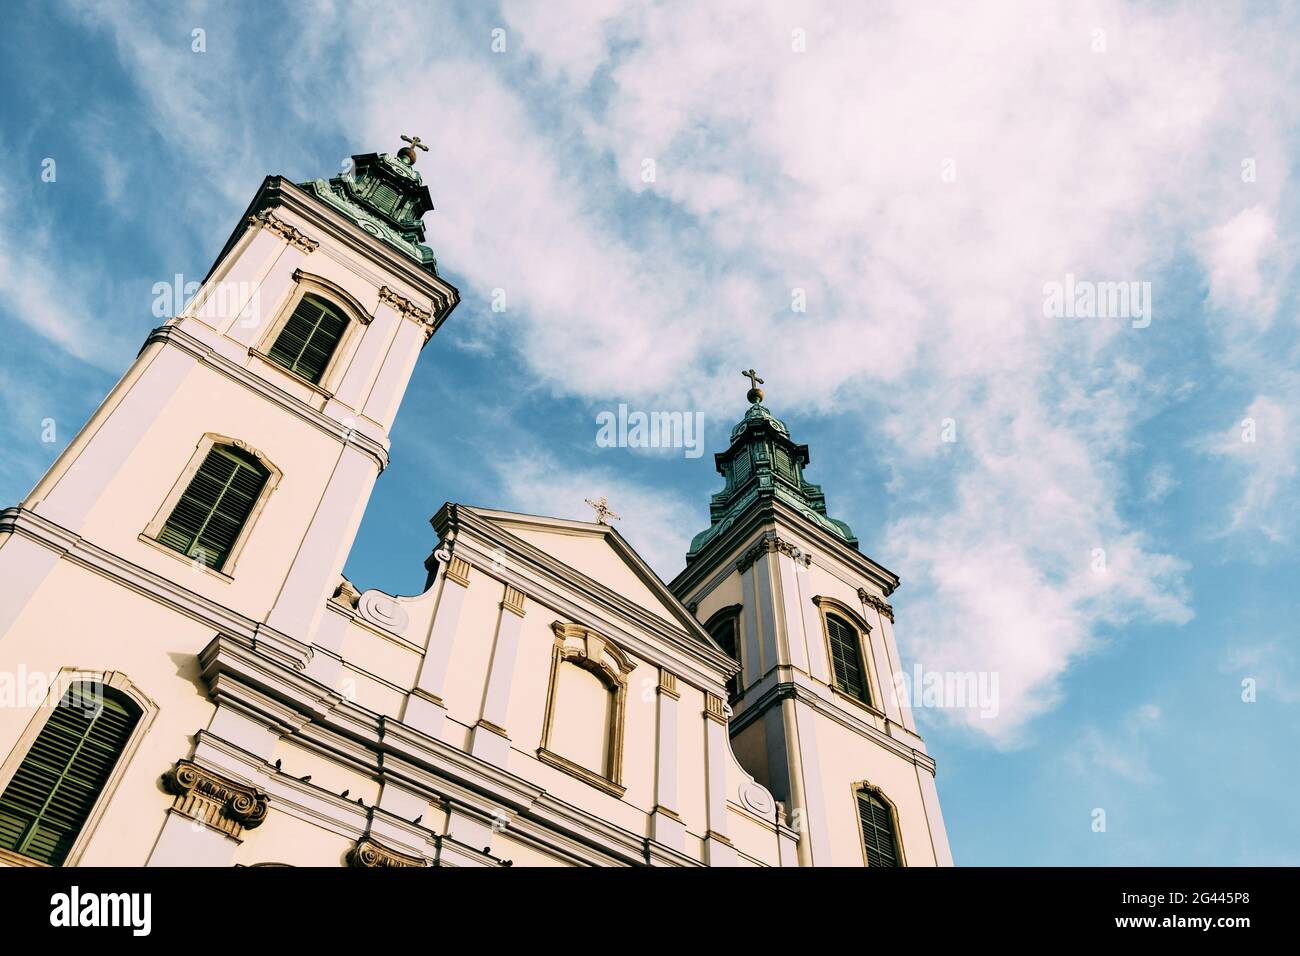 Spiers of a beautiful ancient temple in Budapest against a blue sky with white clouds Stock Photo